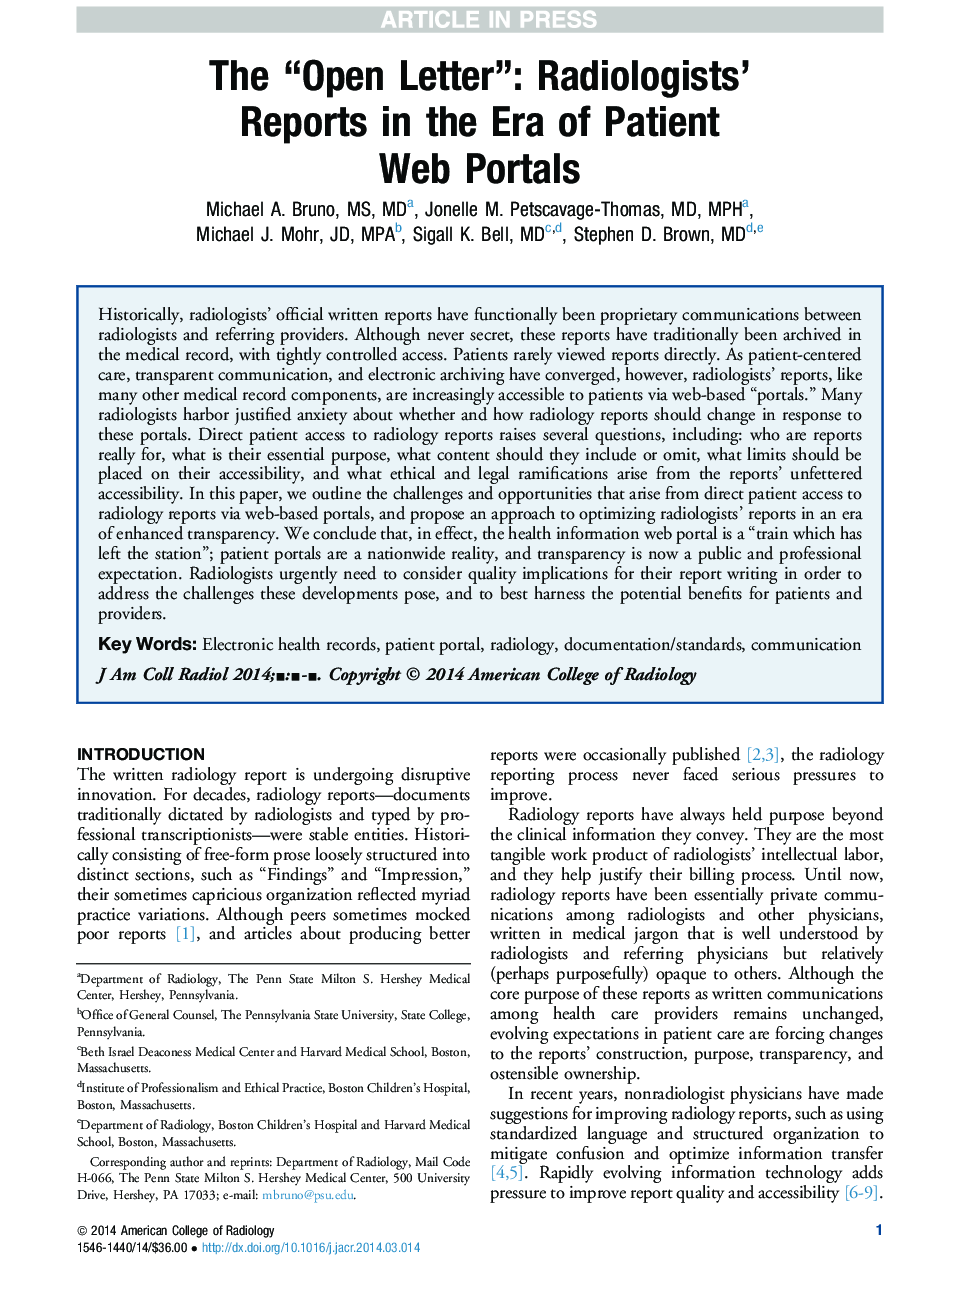 The “Open Letter”: Radiologists' Reports in the Era of Patient WebÂ Portals